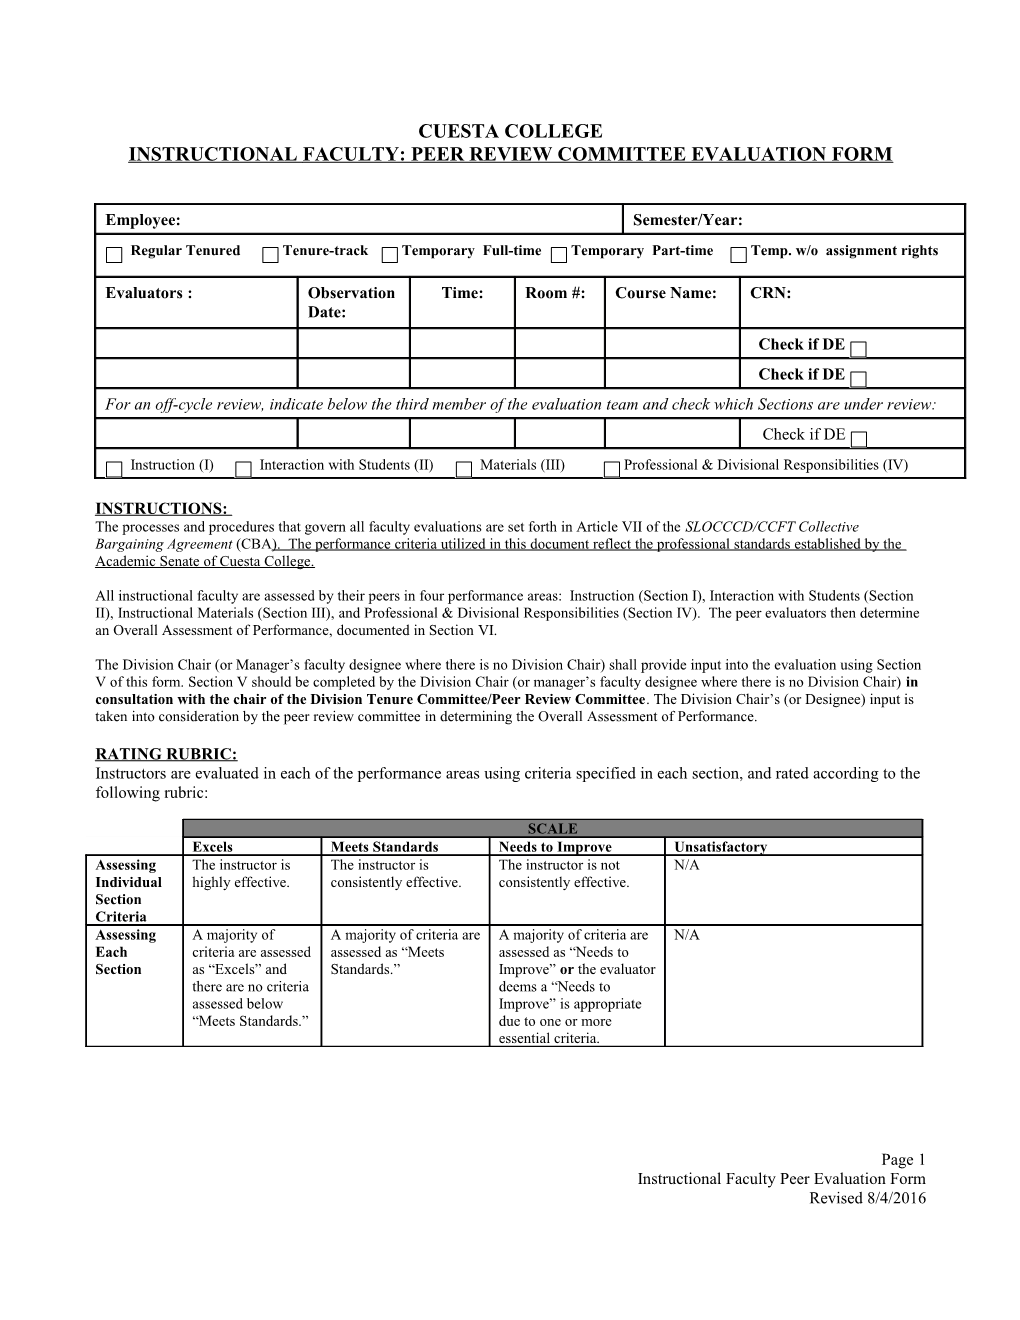 Instructional Faculty: Peer Review Committee Evaluation Form